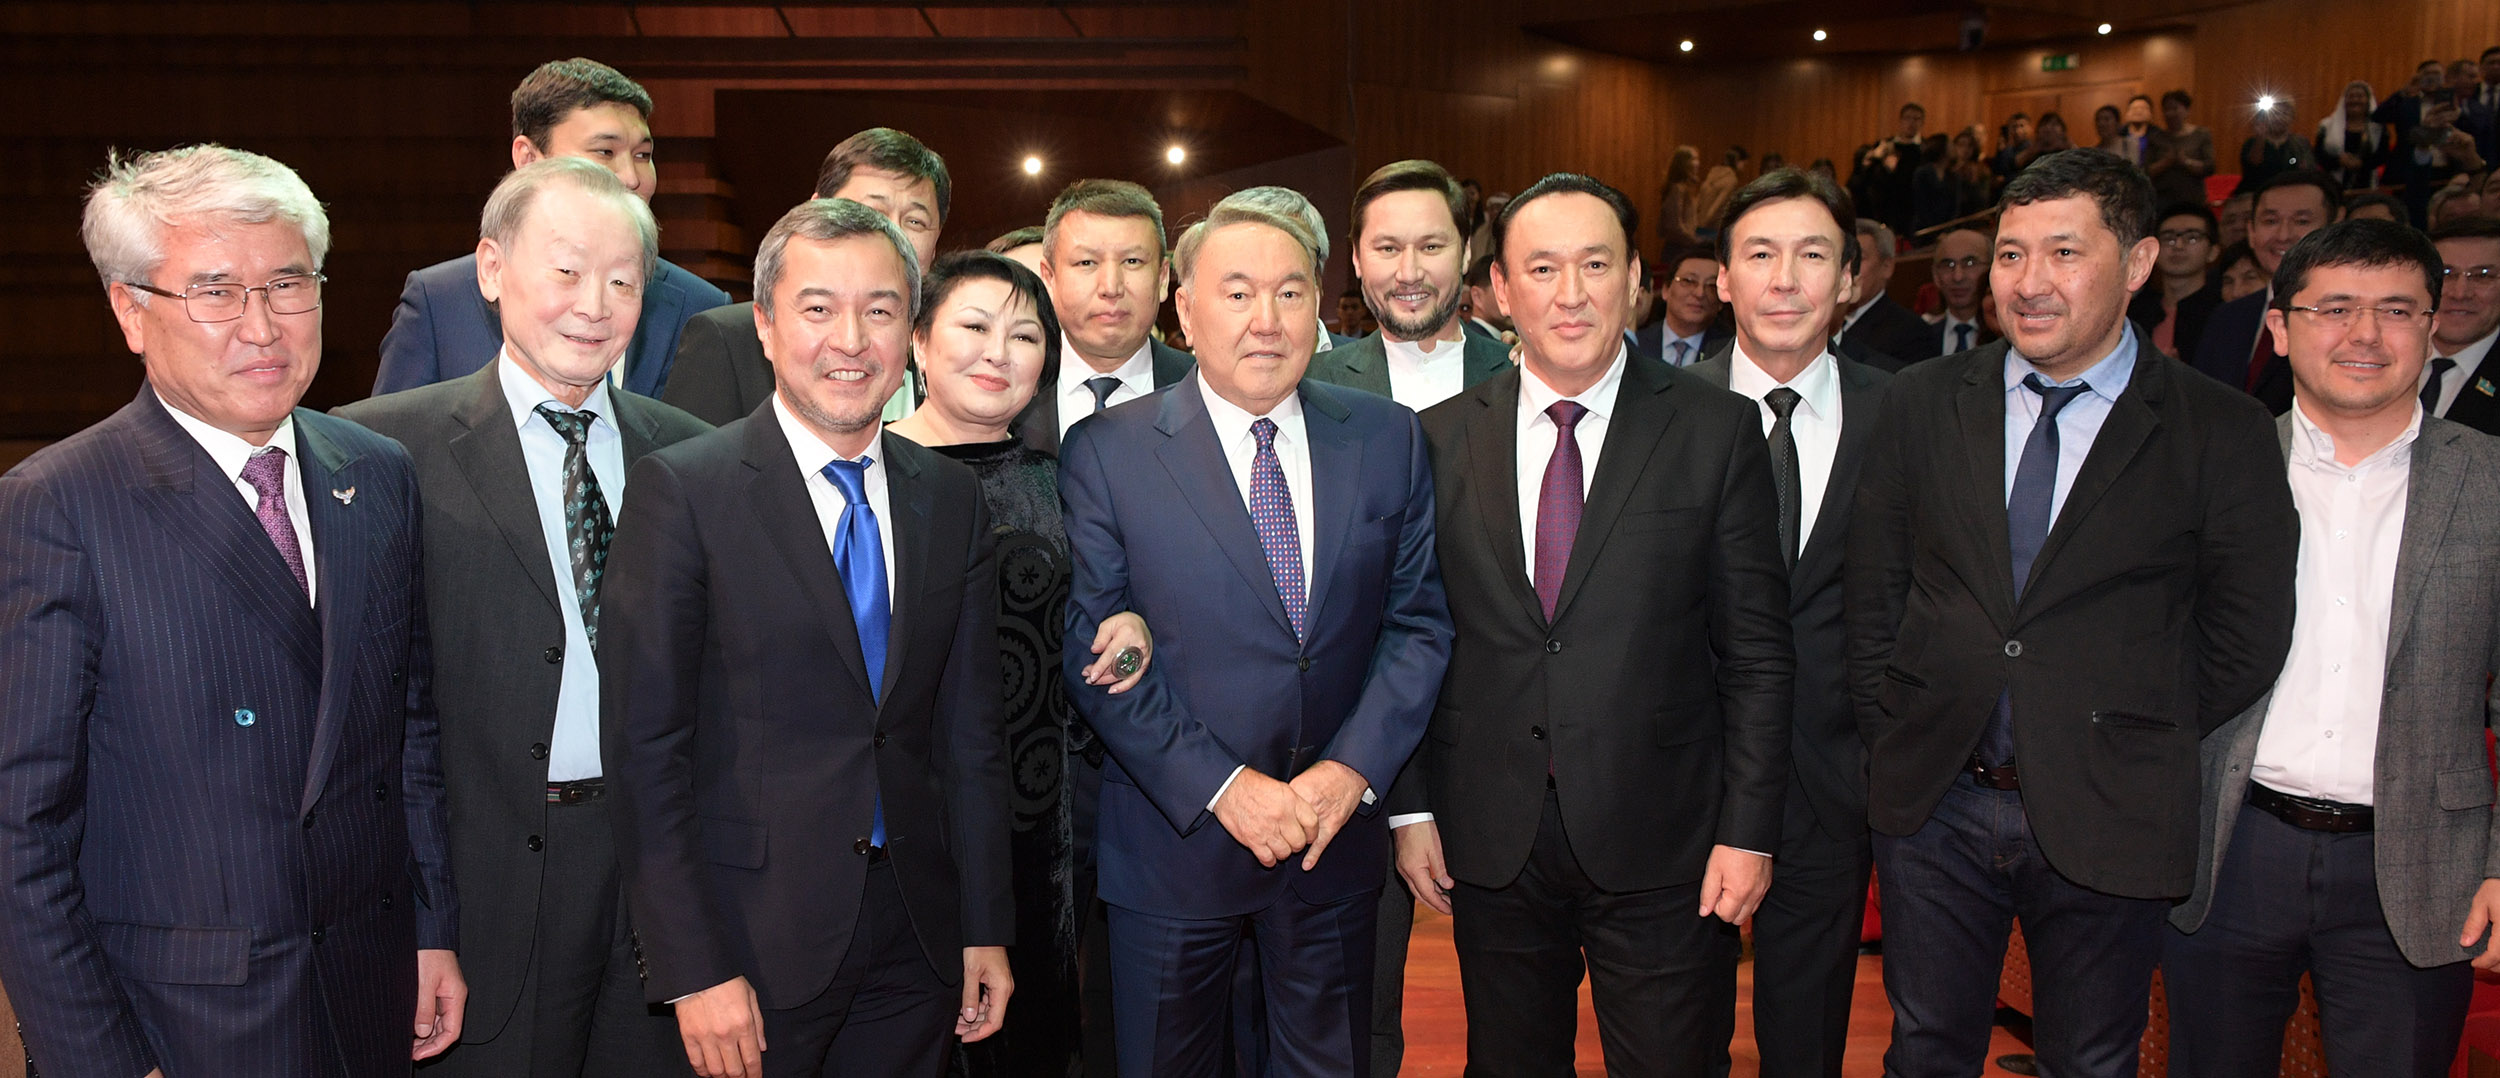 Kazakh President attends the premiere of The Leader’s Way. Astana